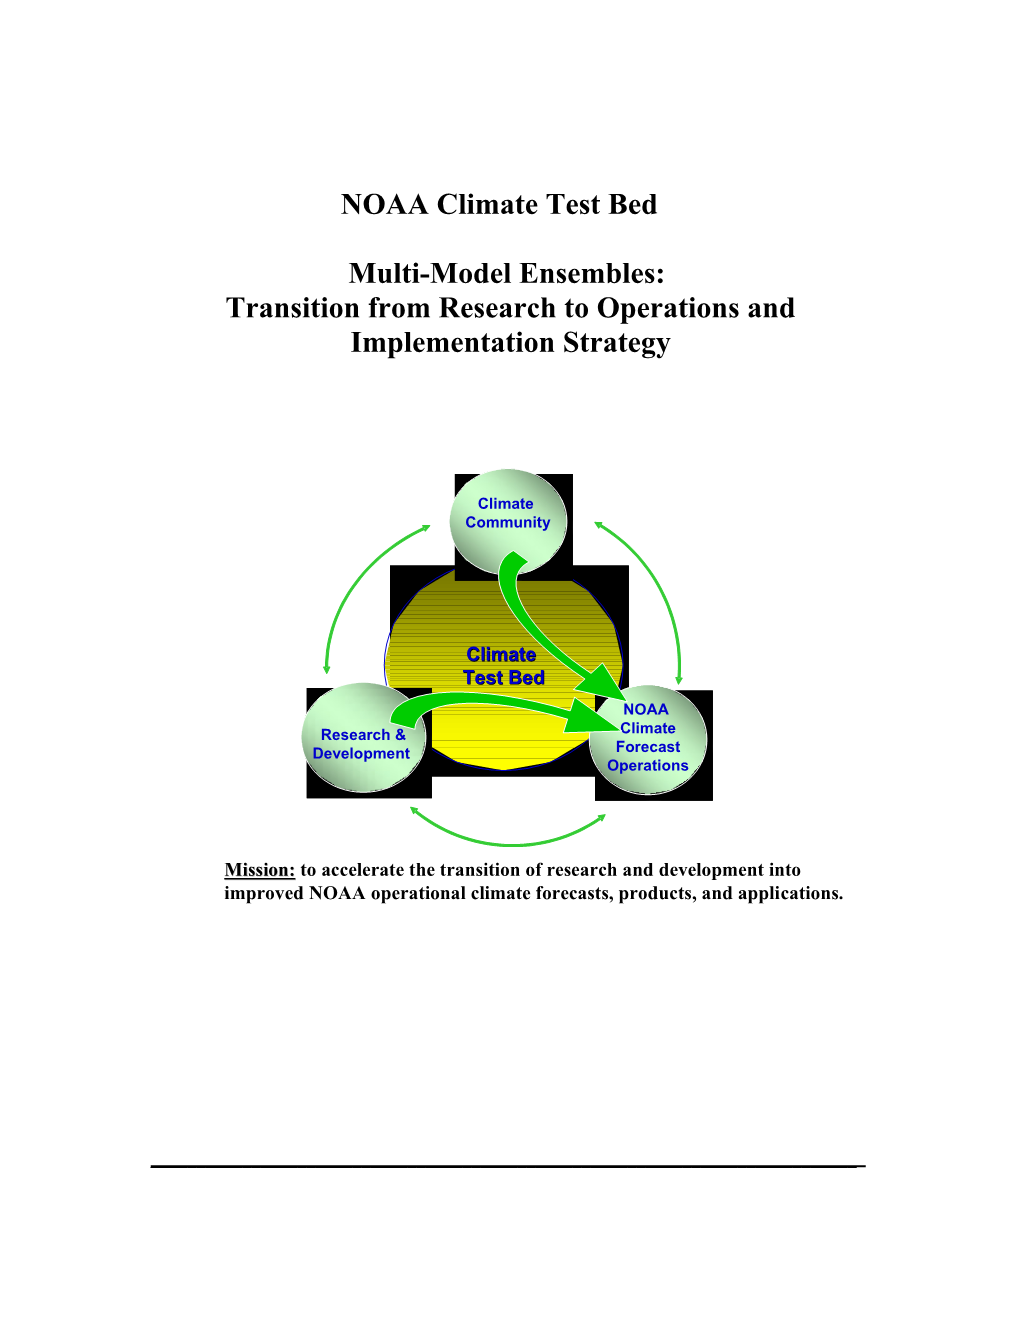 Transition from Research to Operations and Implementation Strategy